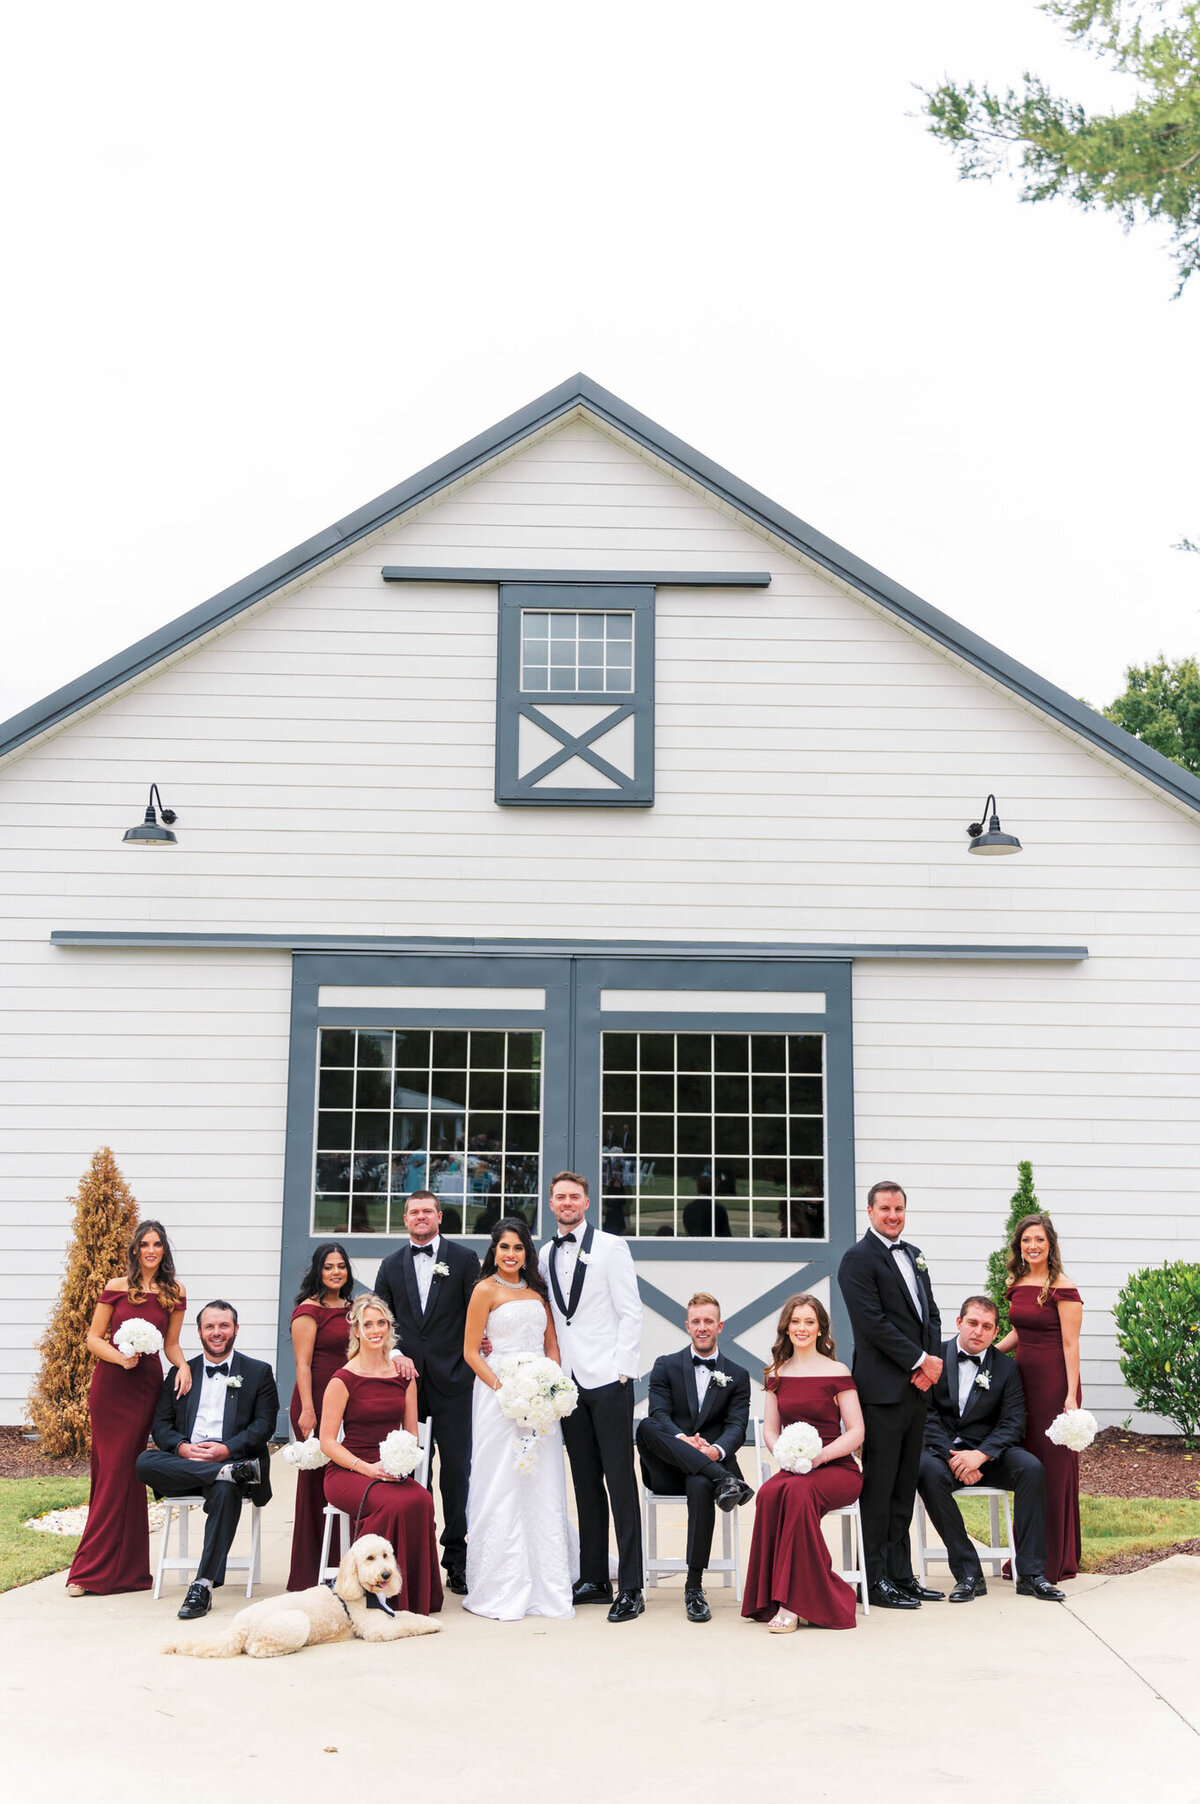 Shaoleen & Colin American Black + White Wedding- Portaits- Entire Wedding Party in front of Walnut Hill Barn